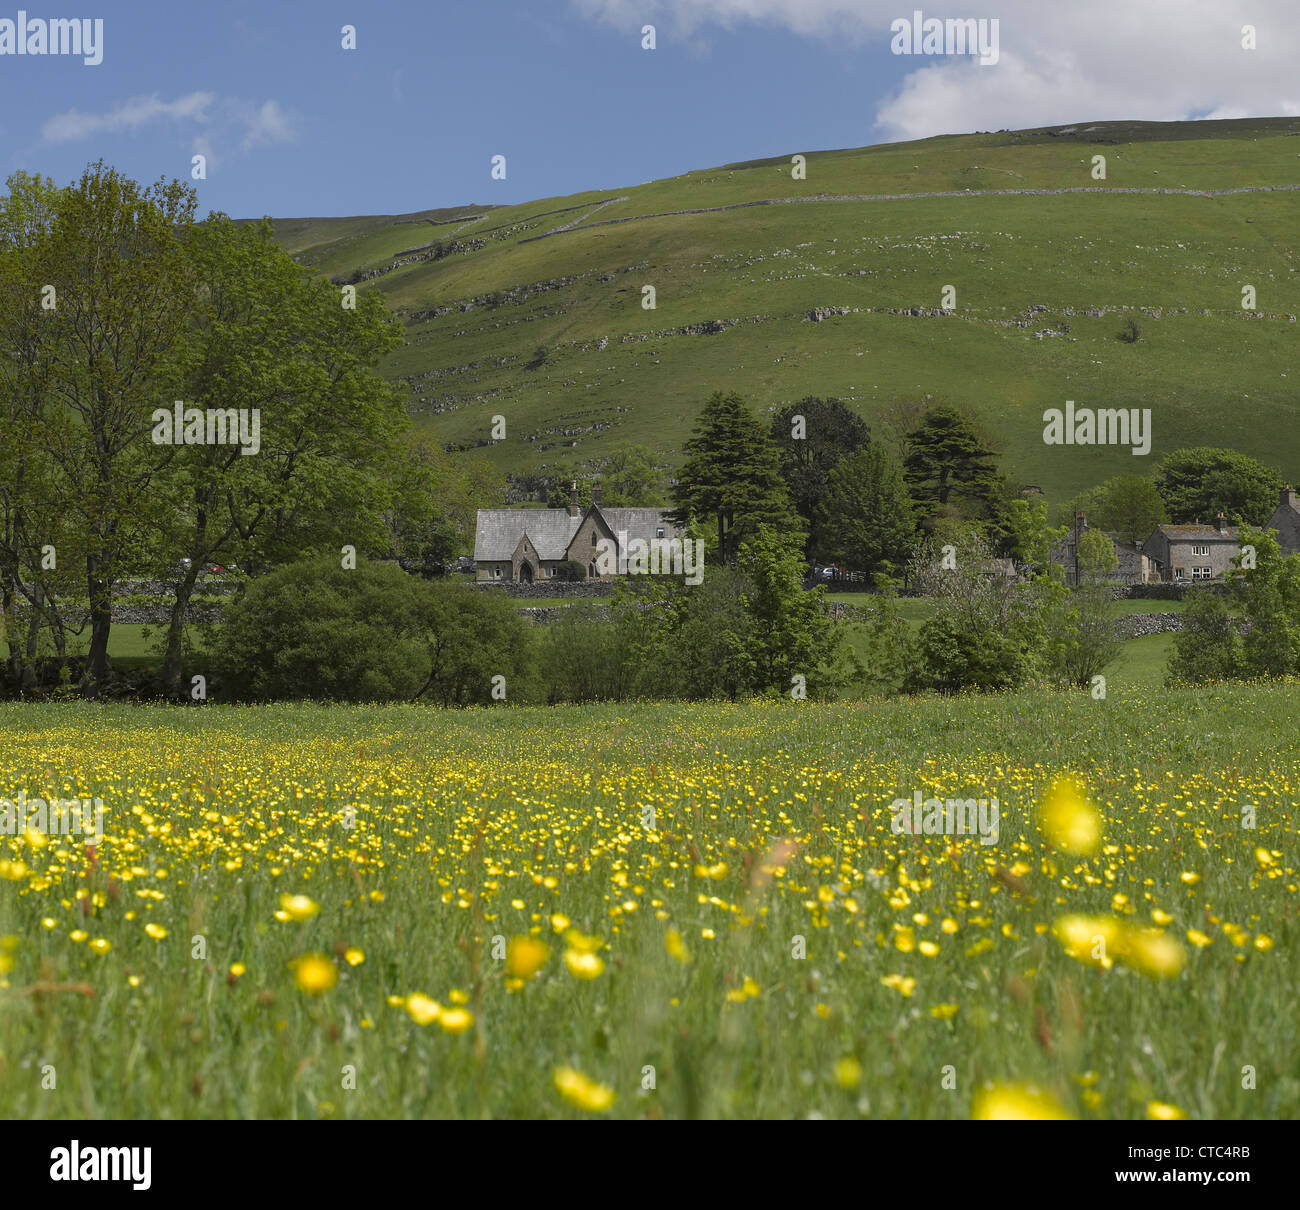 Buckden and Buckden Pike in summer Upper Wharfedale Yorkshire Dales National Park North Yorkshire England UK United Kingdom GB Great Britain Stock Photo